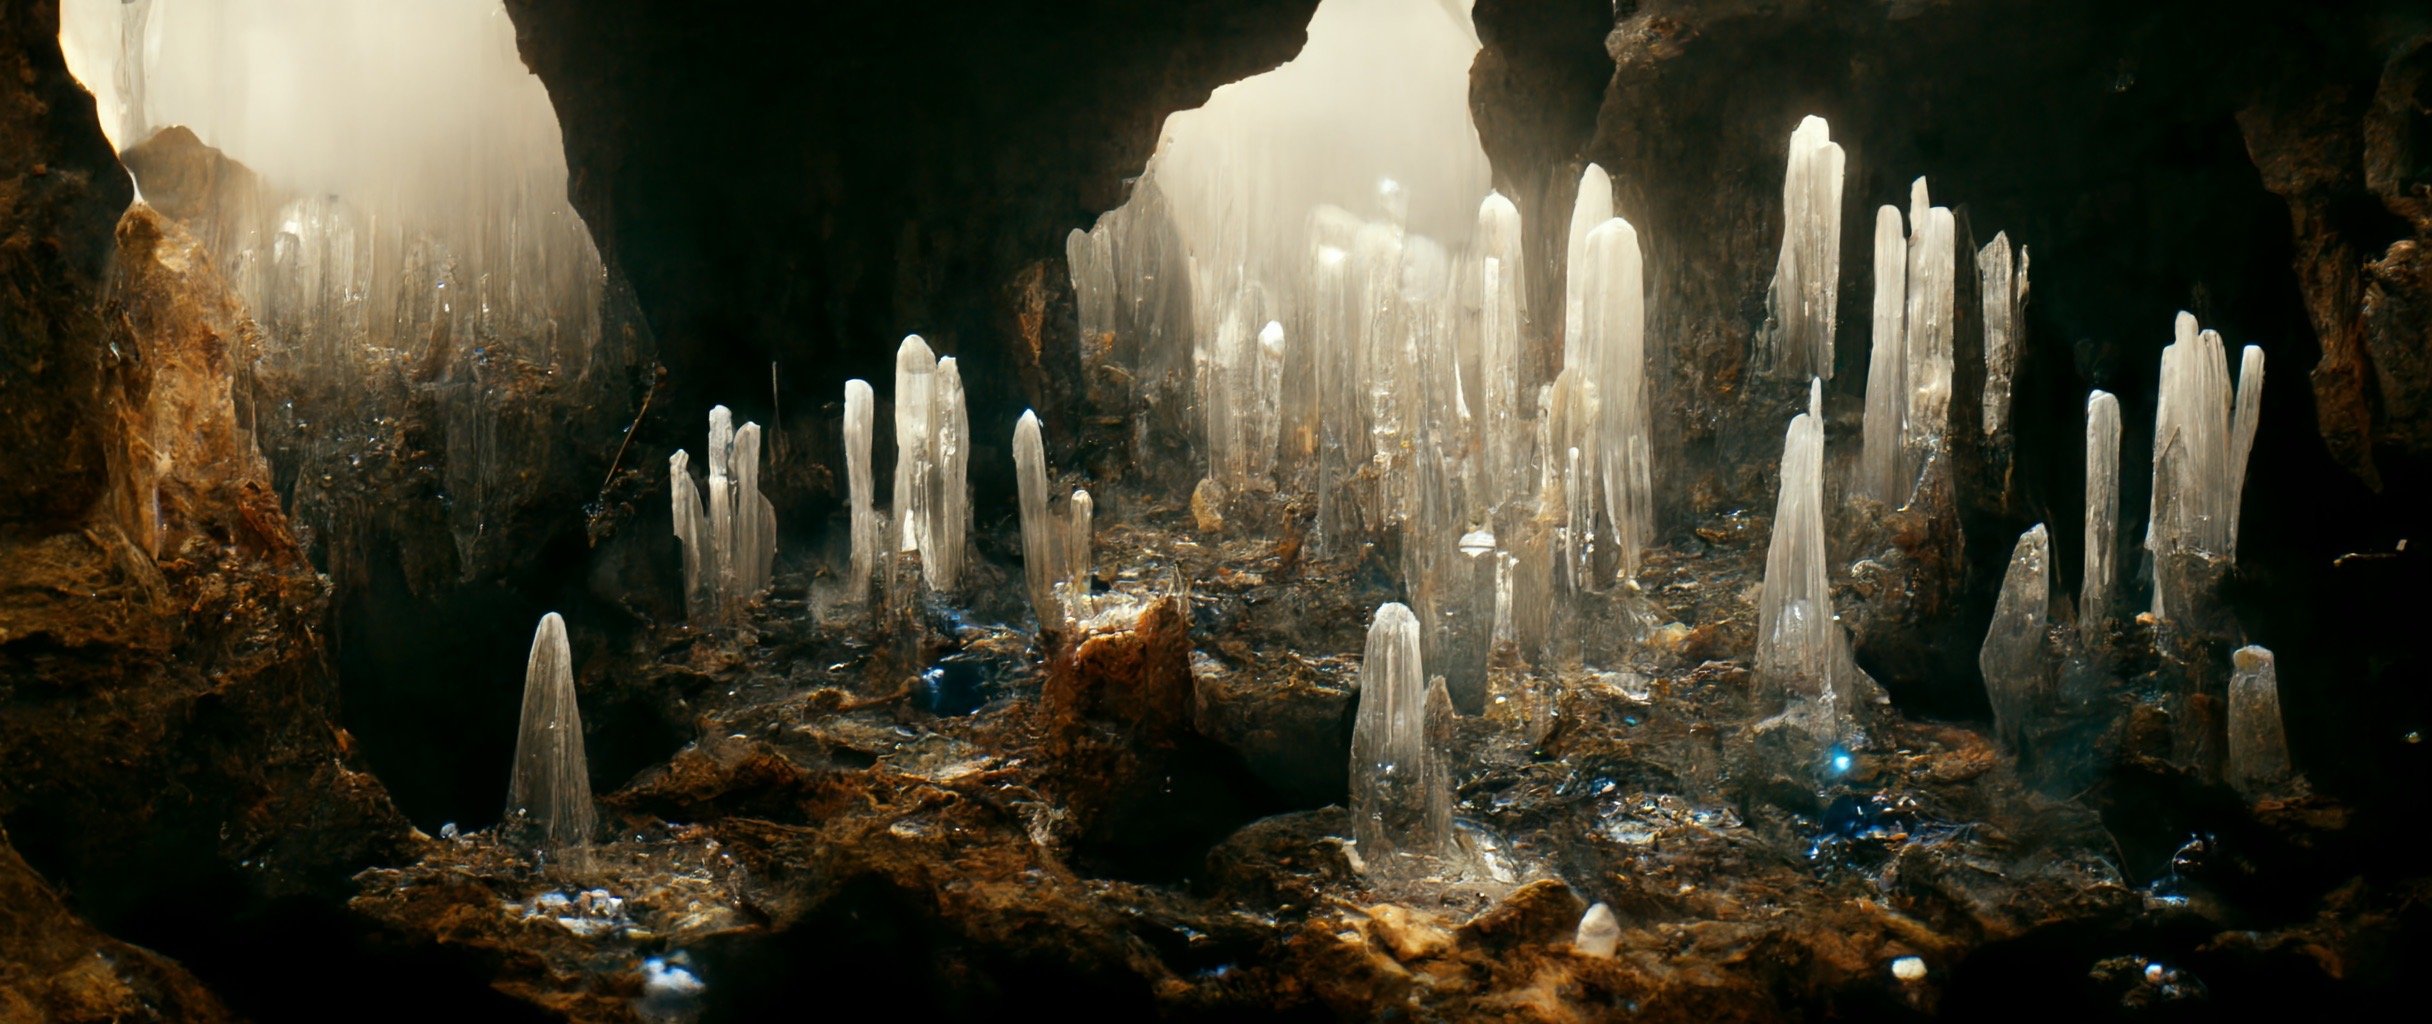 9595d541-efdc-45a5-99cd-2df1a62c0cf2_S3RAPH_httpss.mj.runqorPEd__incredible_mystical_cave_filled_with_sapphires._Stalactites_and_stalagmites_dri.JPG